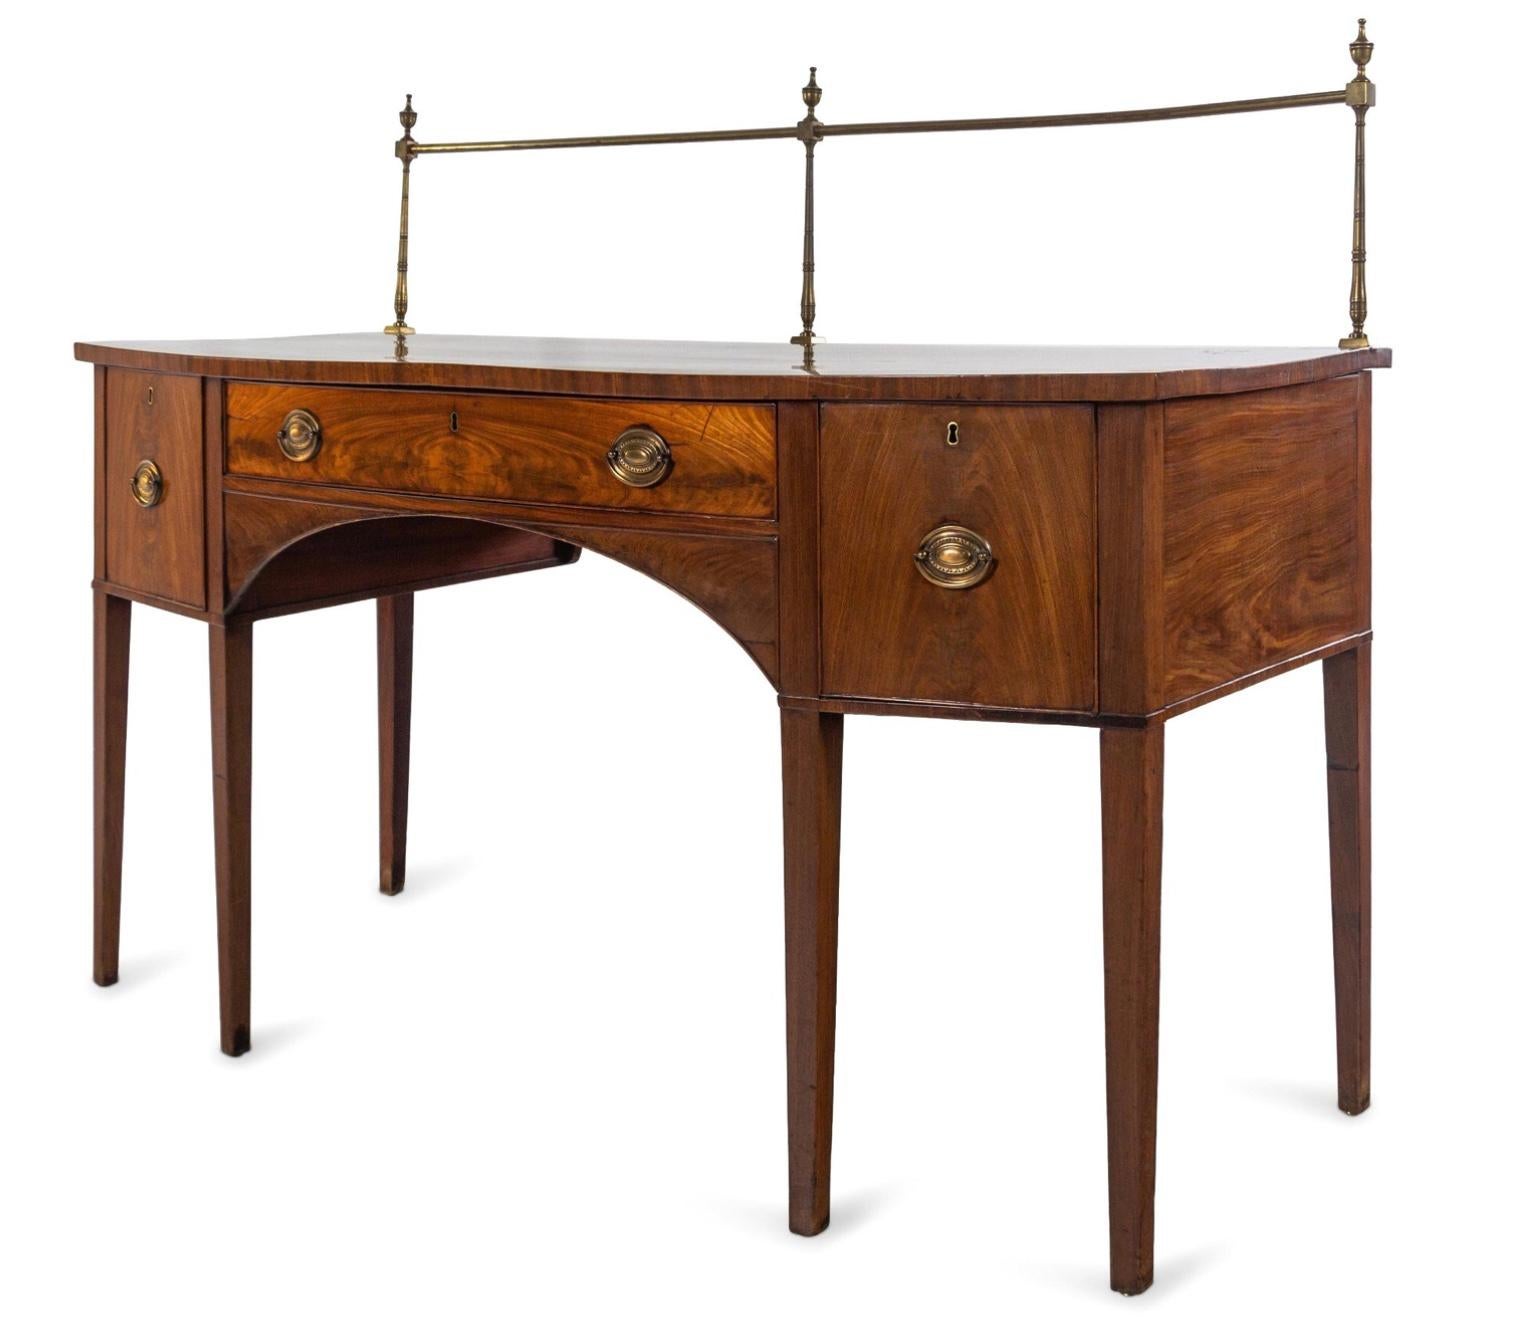 Fine George III period sideboard features a wonderful serpentine profile with finely grained mahogany boards throughout. The top in particular is a most attractive selection of mahogany, the back edge highlighted by three brass posts raising a